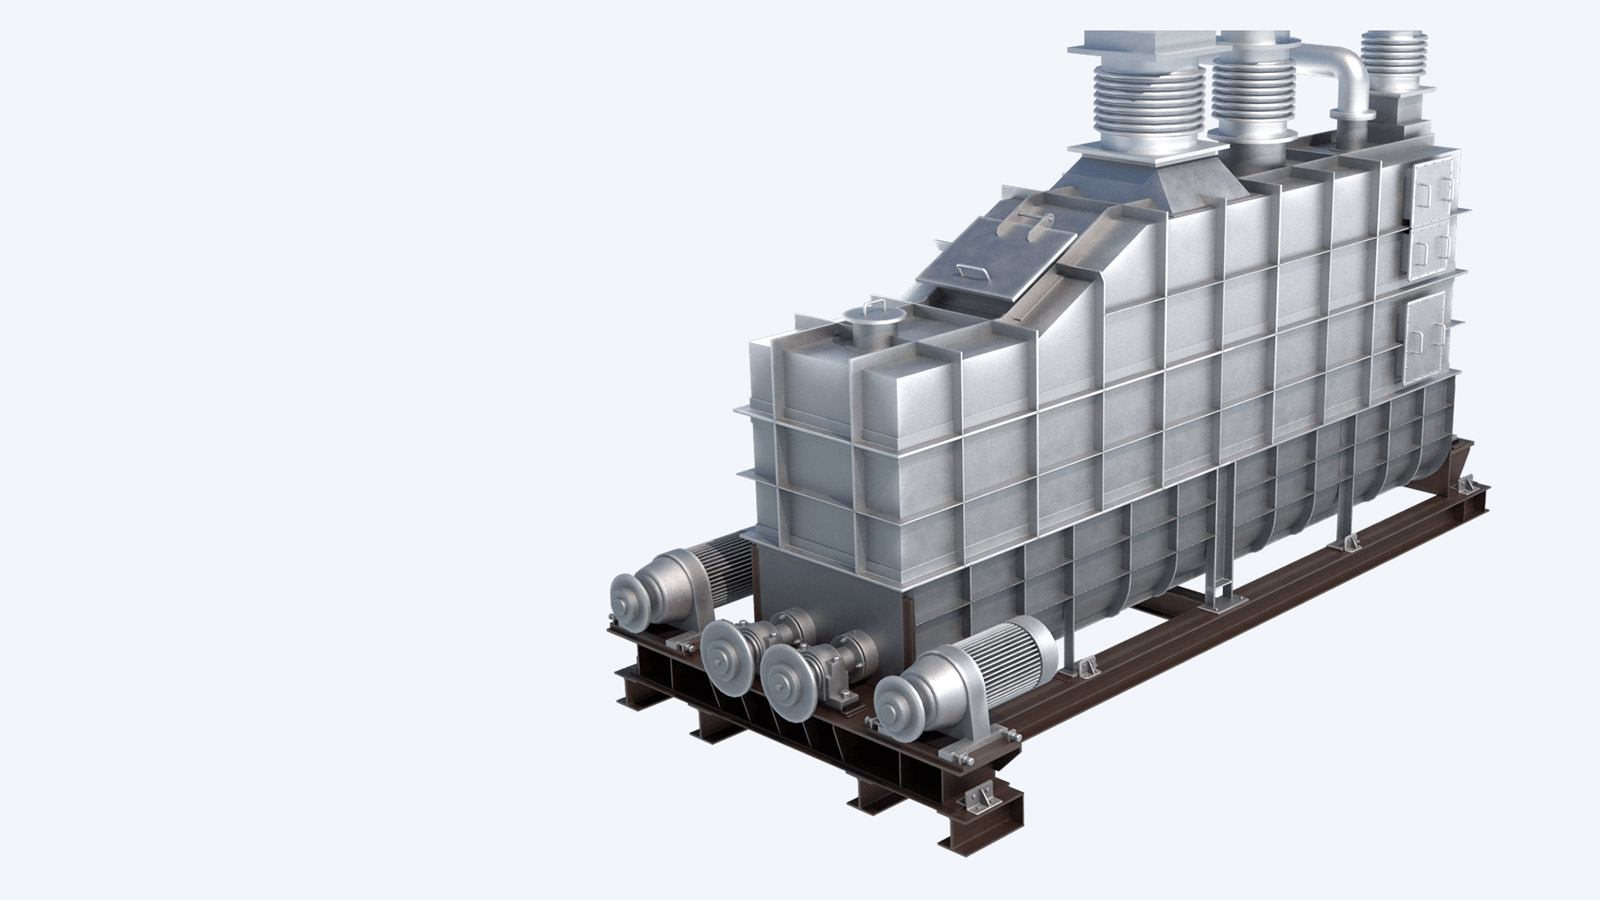 TTR®-D (Taiheiyo Thermal Reactor for Drying)